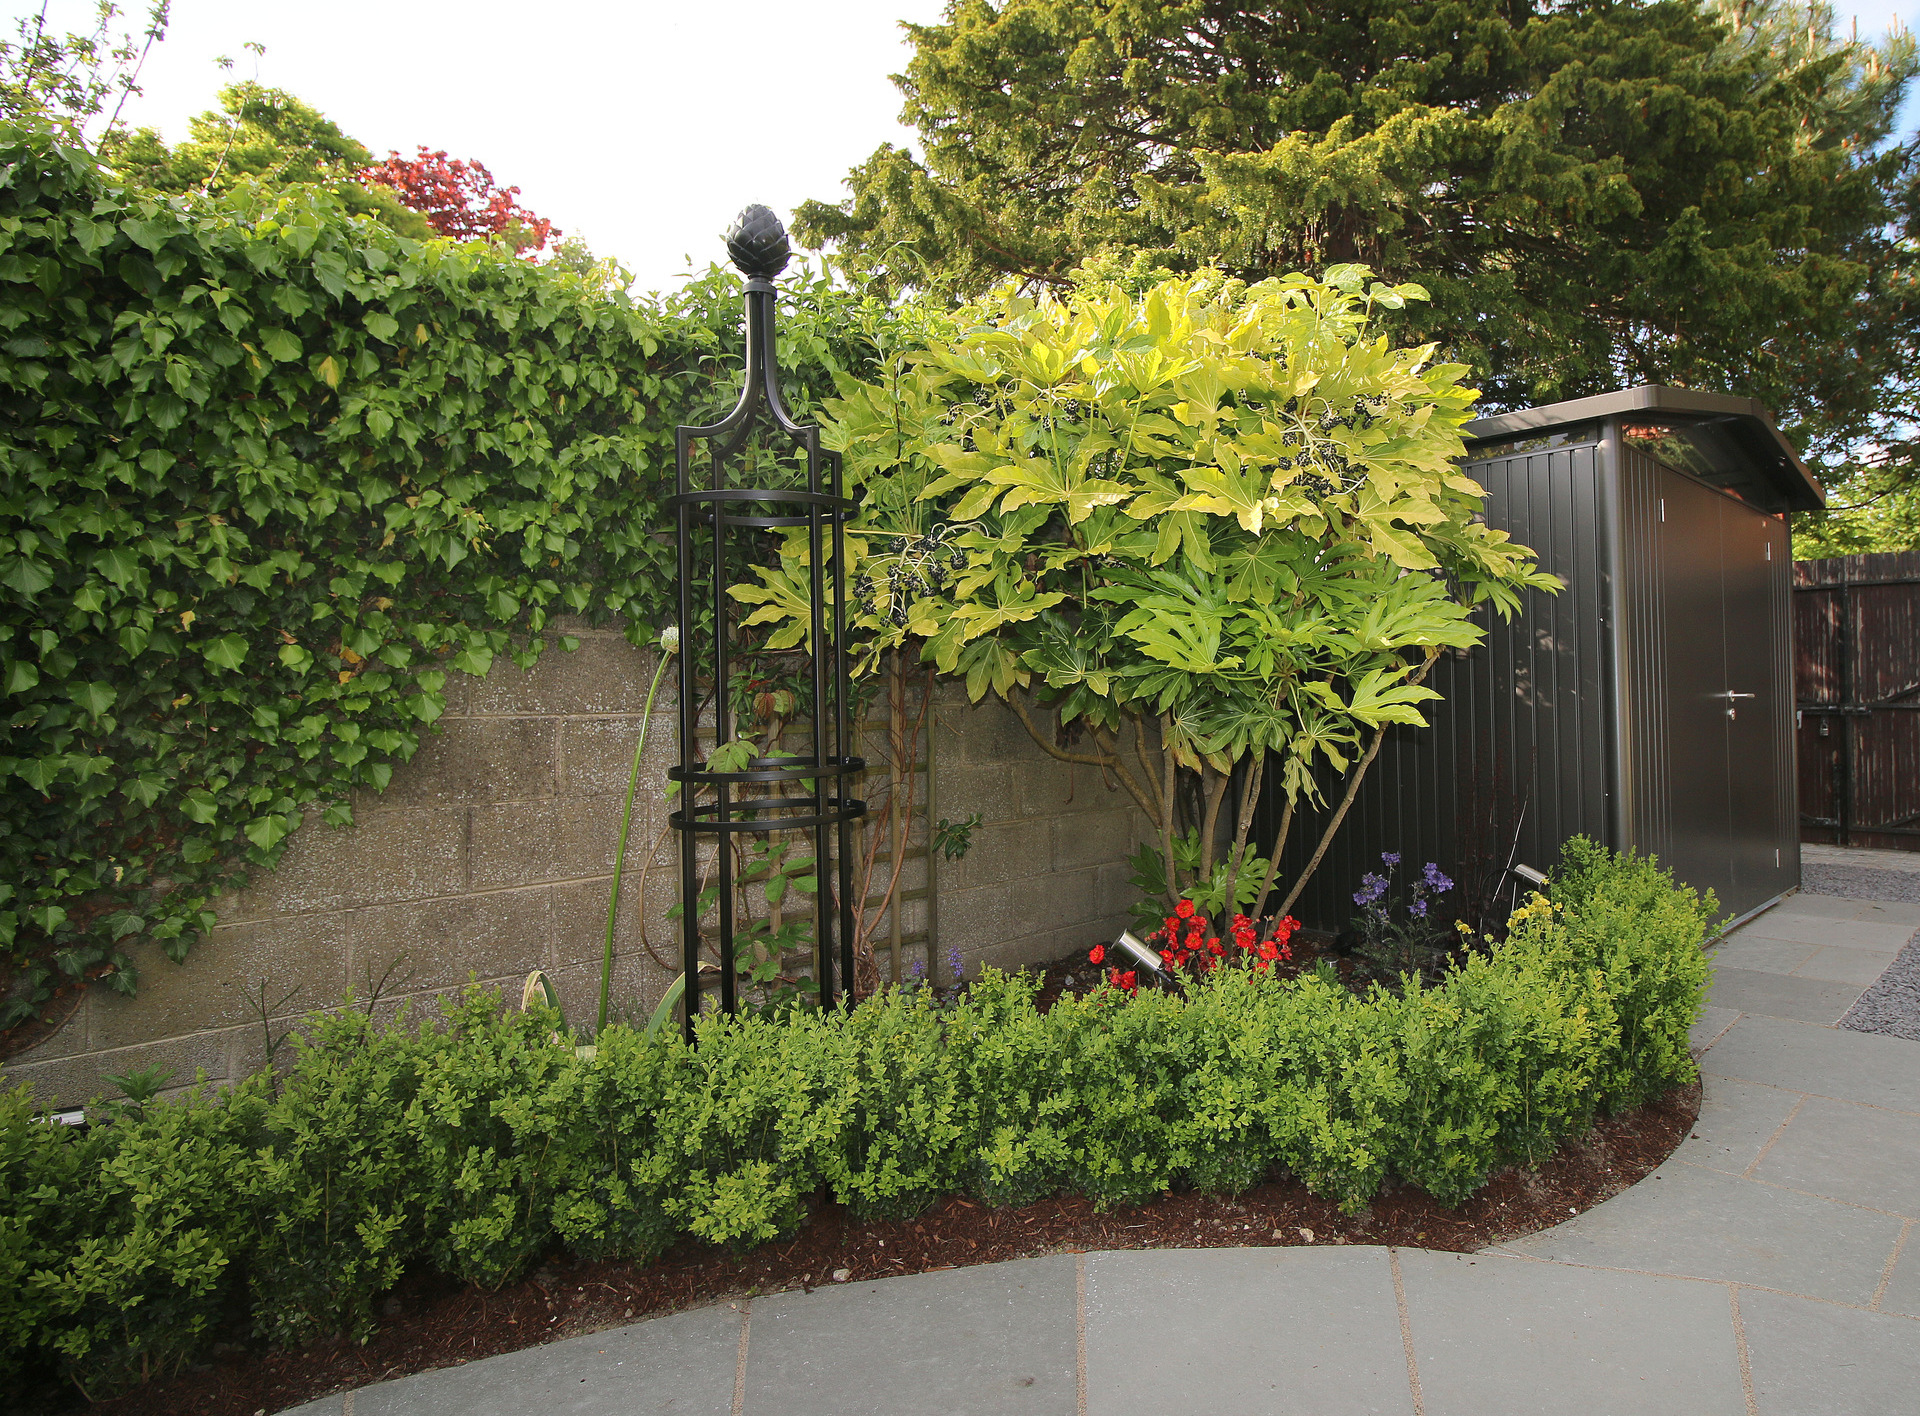 Garden Design & Planting in Clontarf, Dublin 3 featuring Buxus Hedging, Fatsia Japonica, Rose Obelisk, mixed Herbaceous Borders